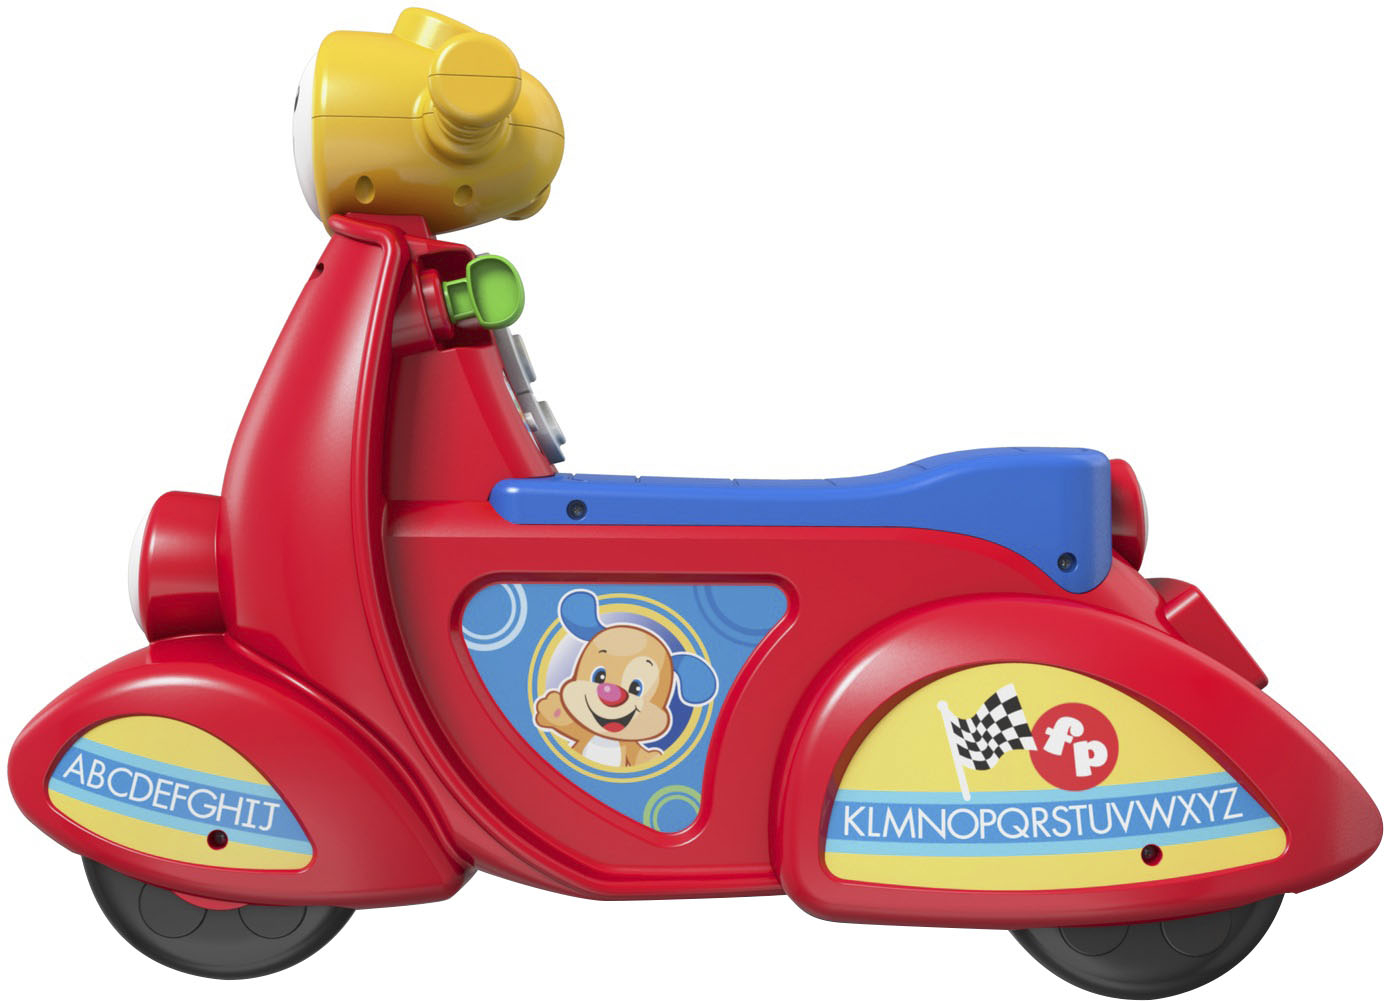 slave lindre Morse kode Fisher-Price Laugh & Learn Smart Stages Scooter Red/Blue CGX01 - Best Buy